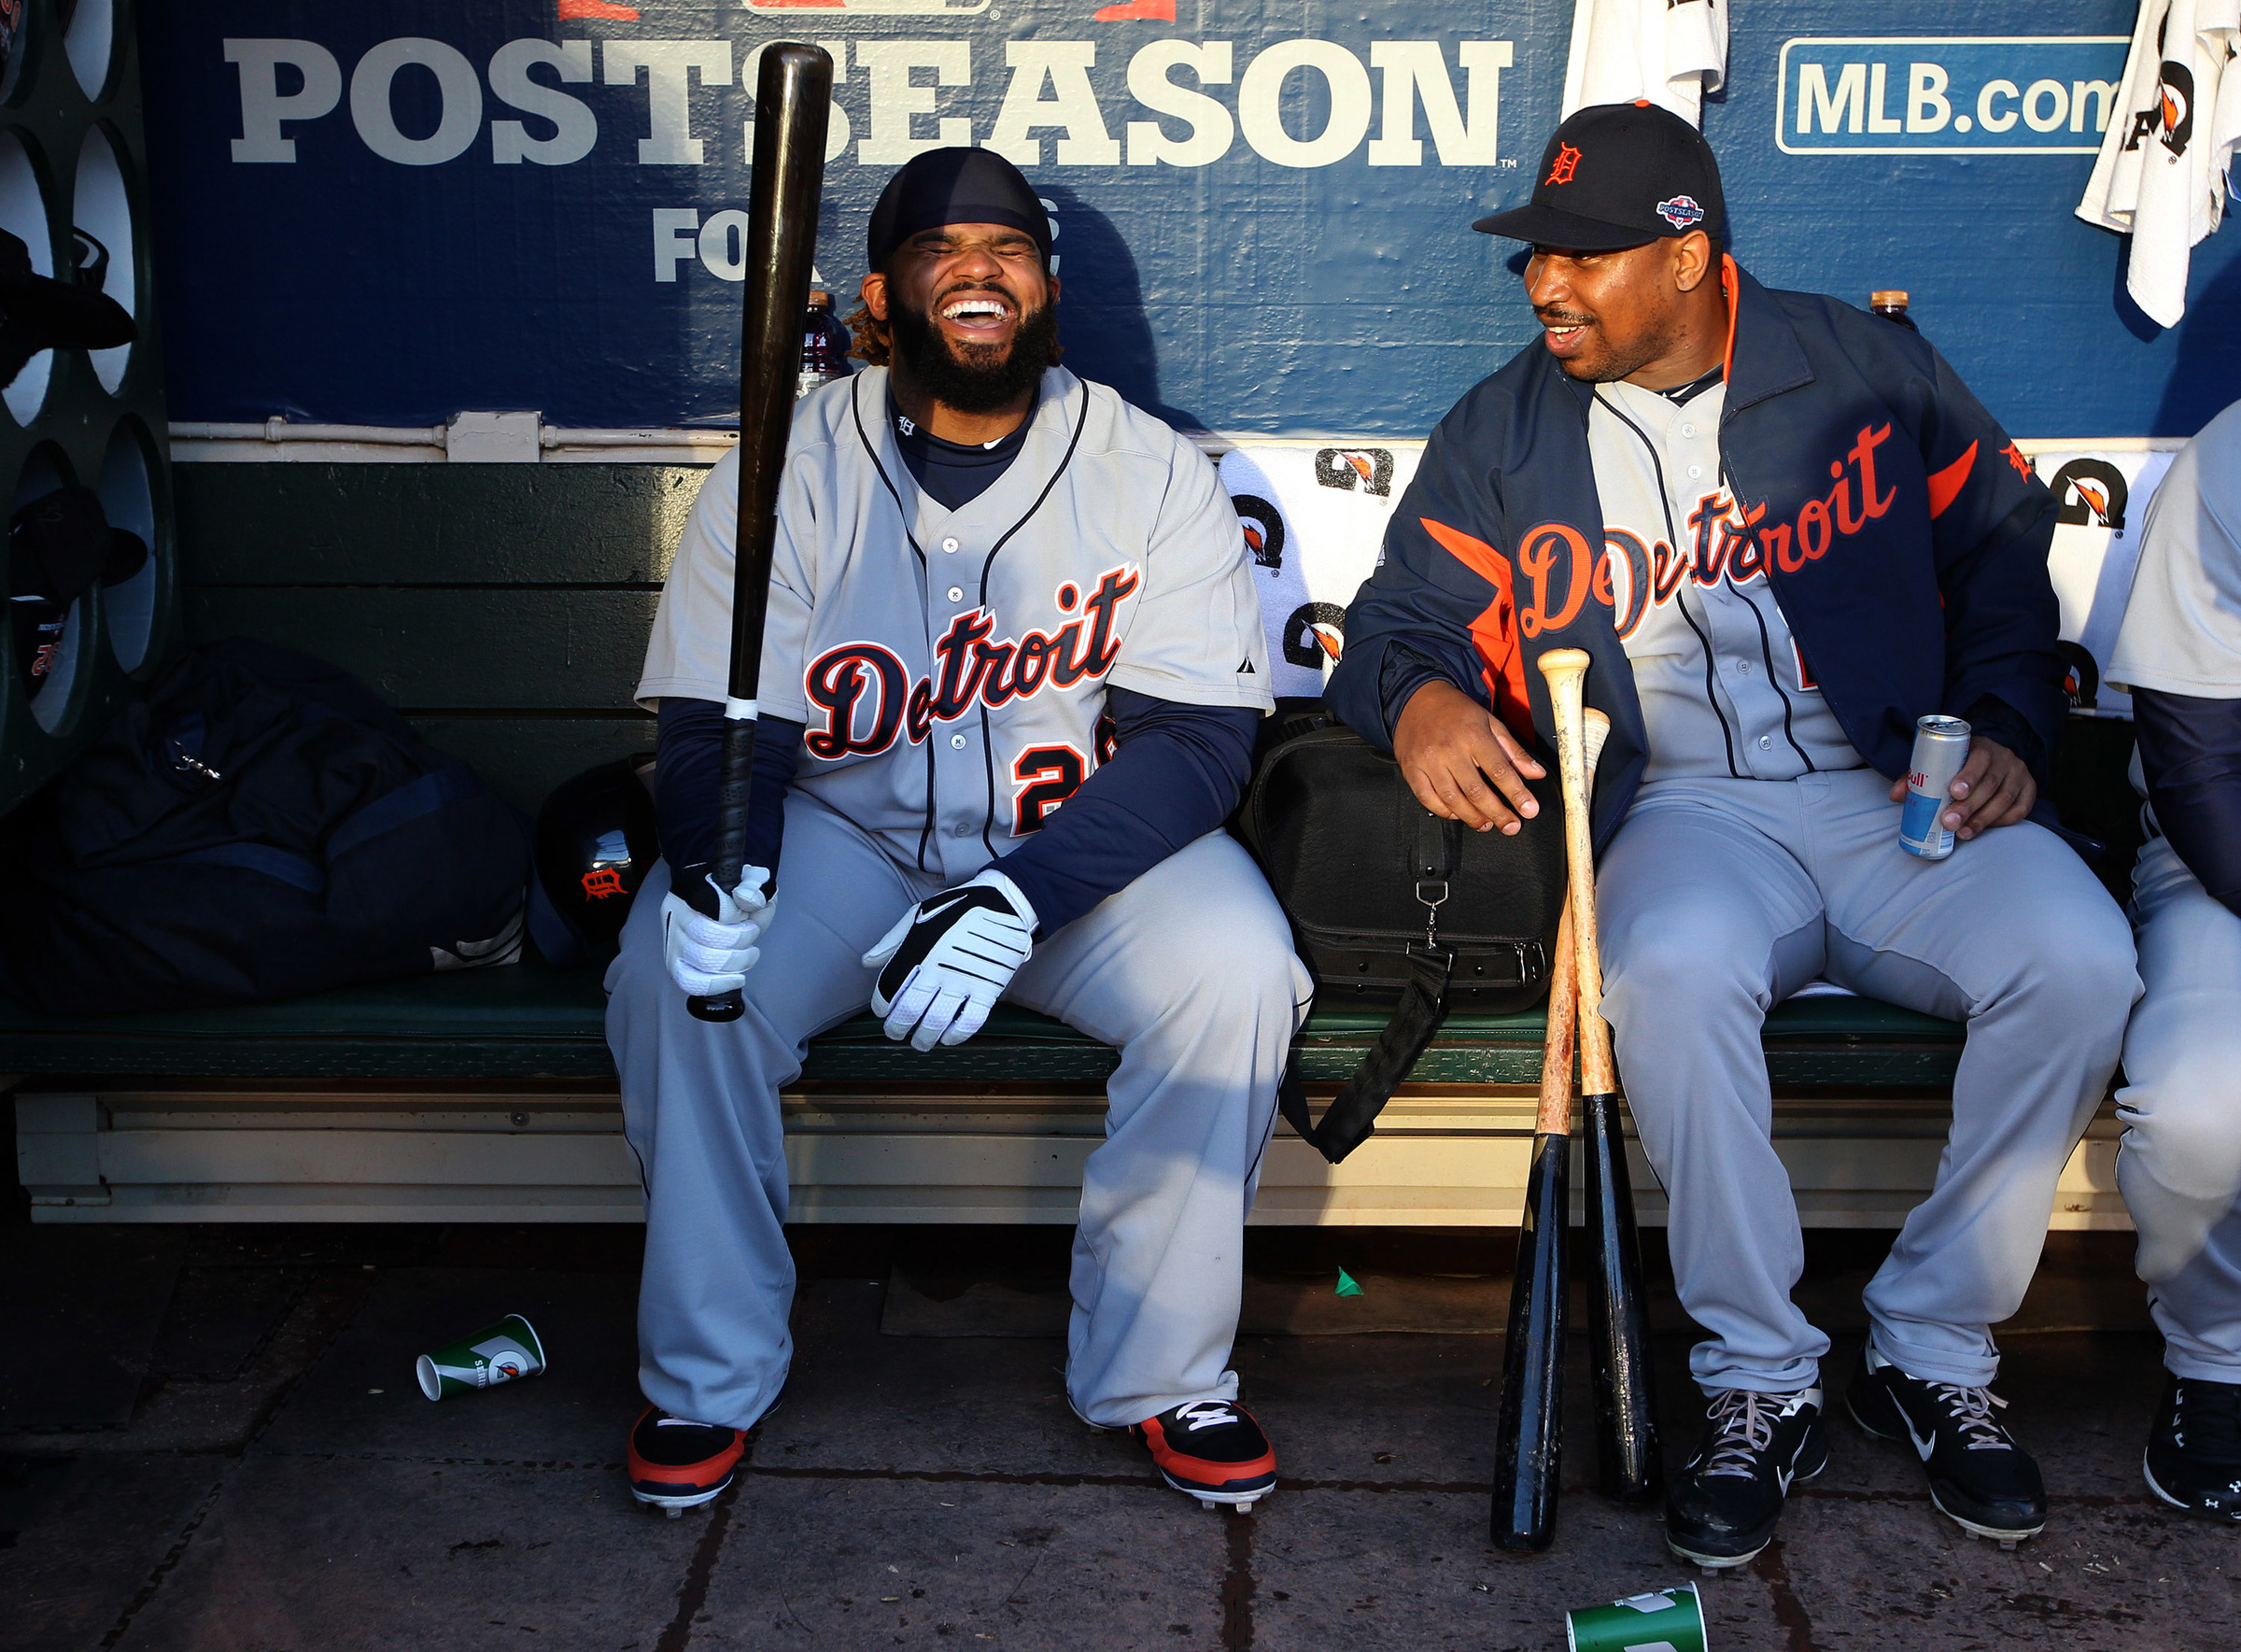 Prince Fielder and Delmon Young, 2012